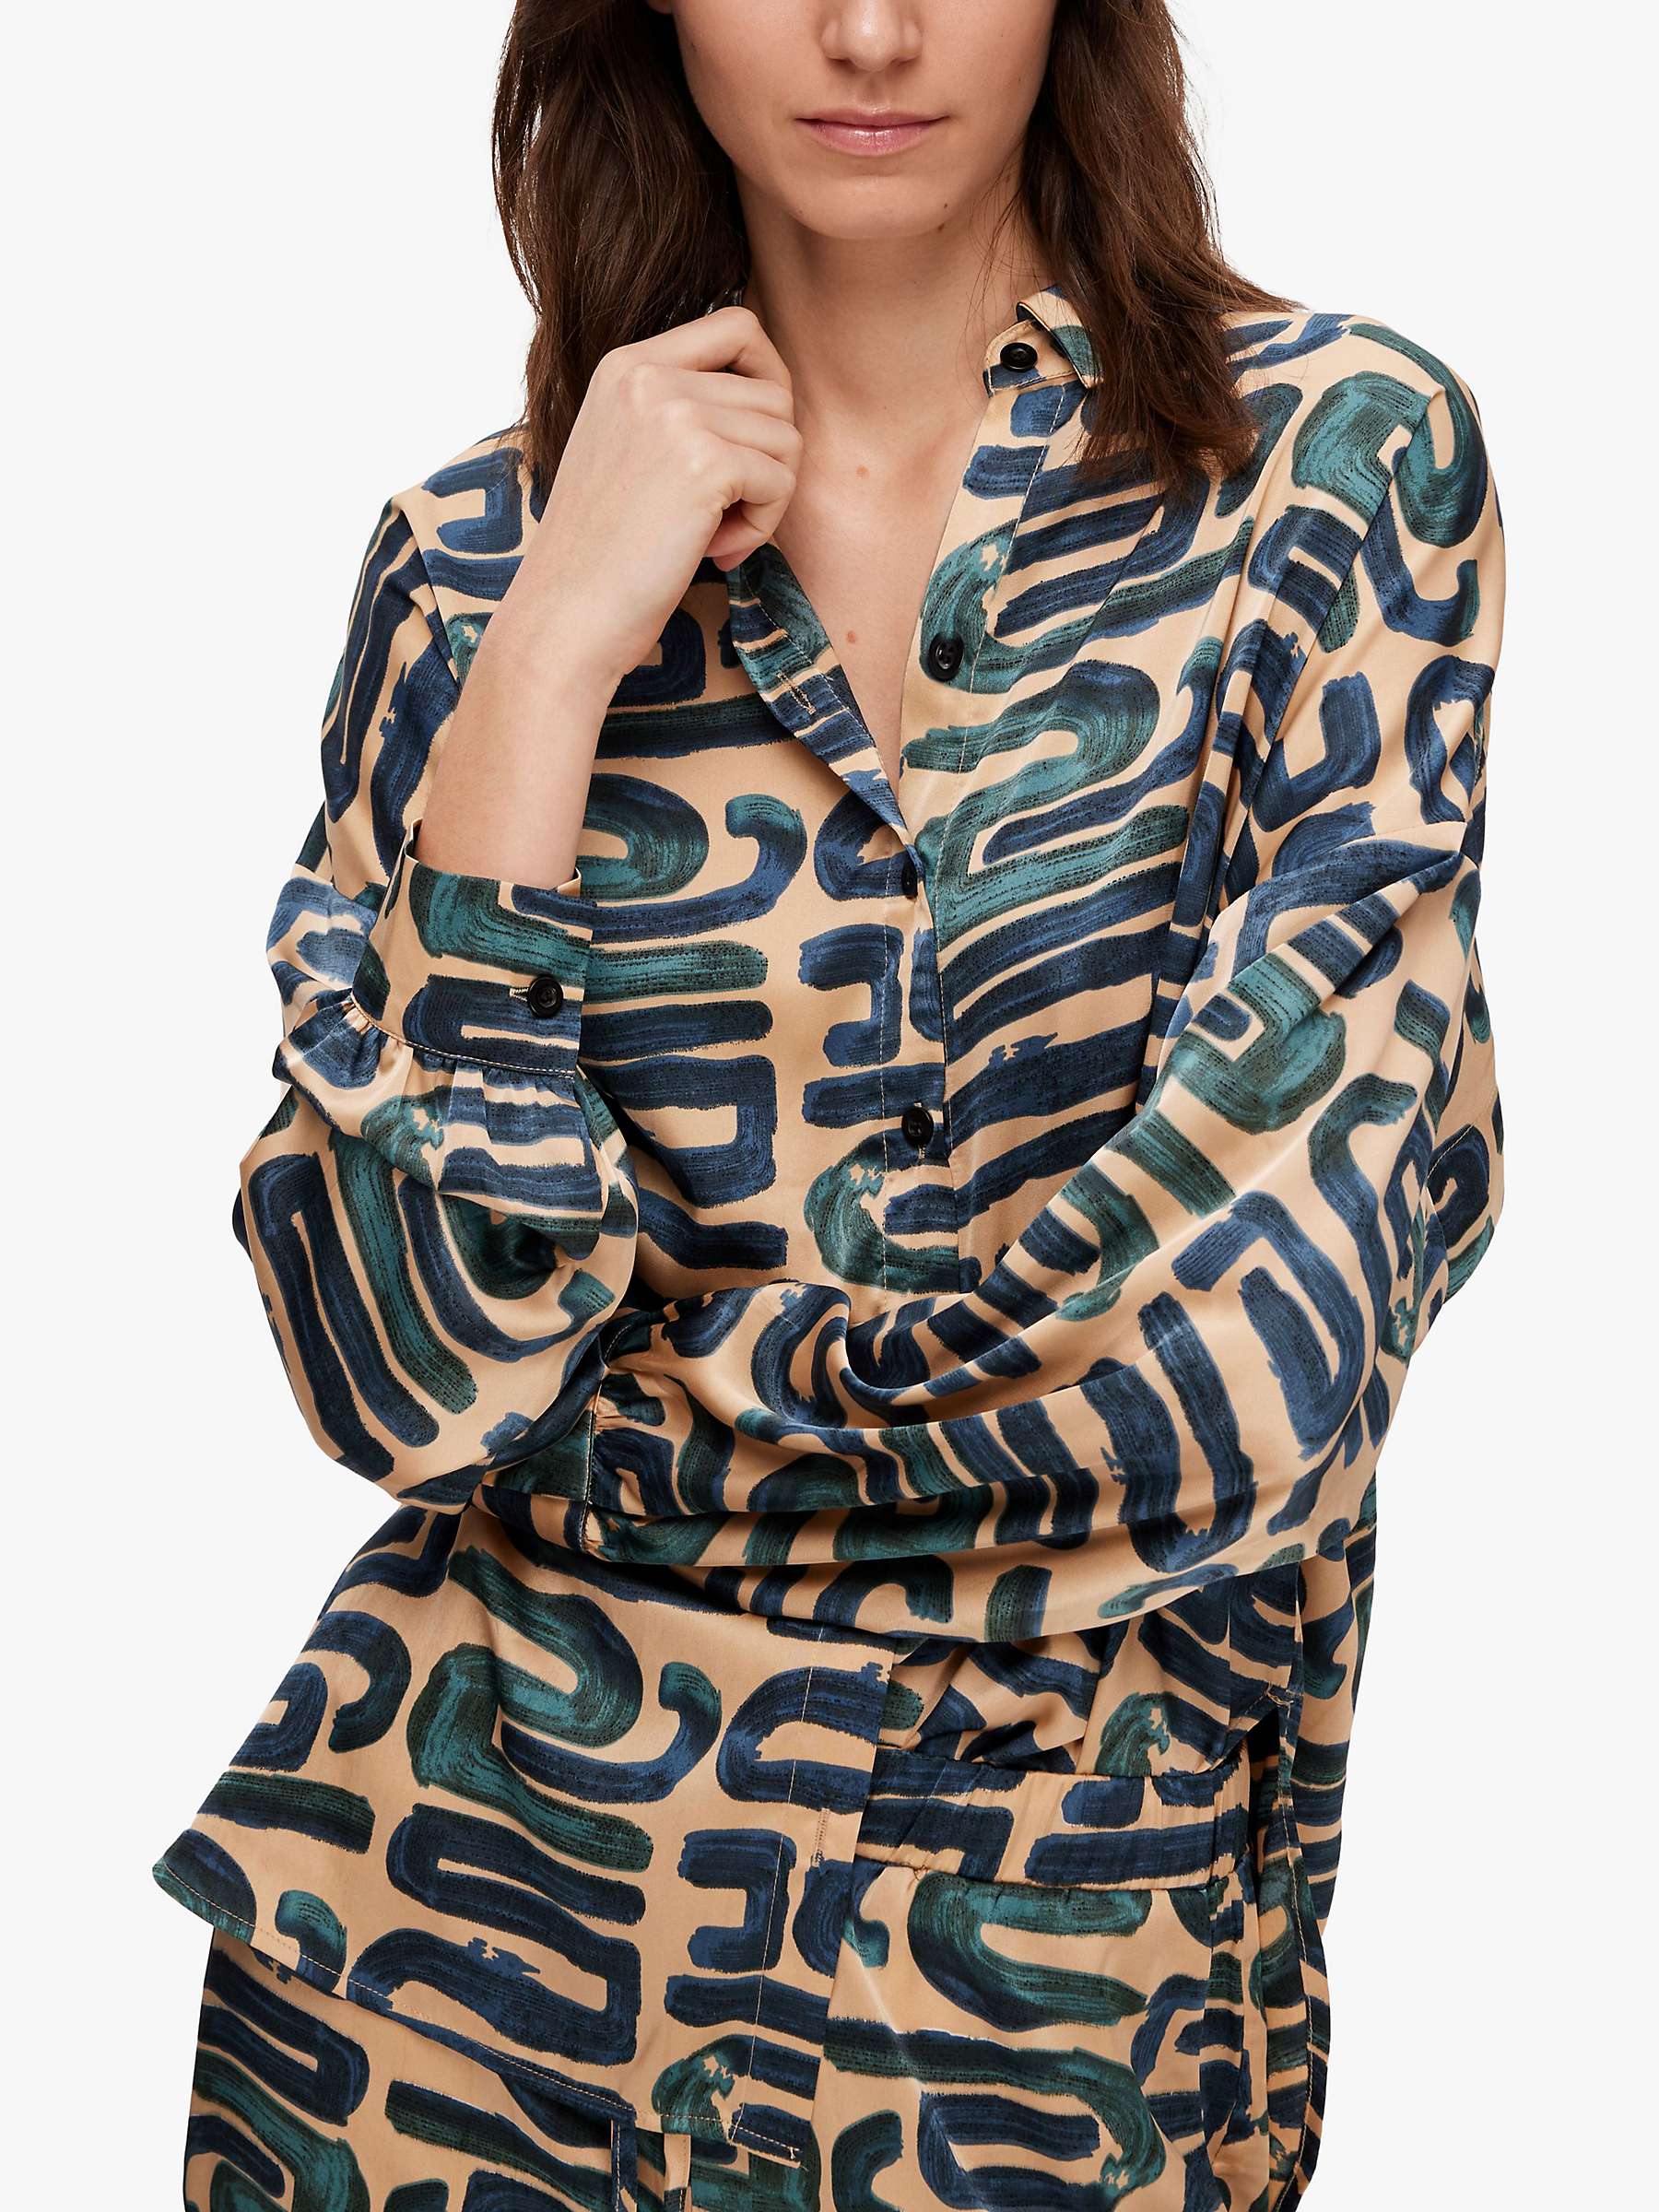 Buy SELECTED FEMME Abstract Print Shirt, Almond Buff Online at johnlewis.com